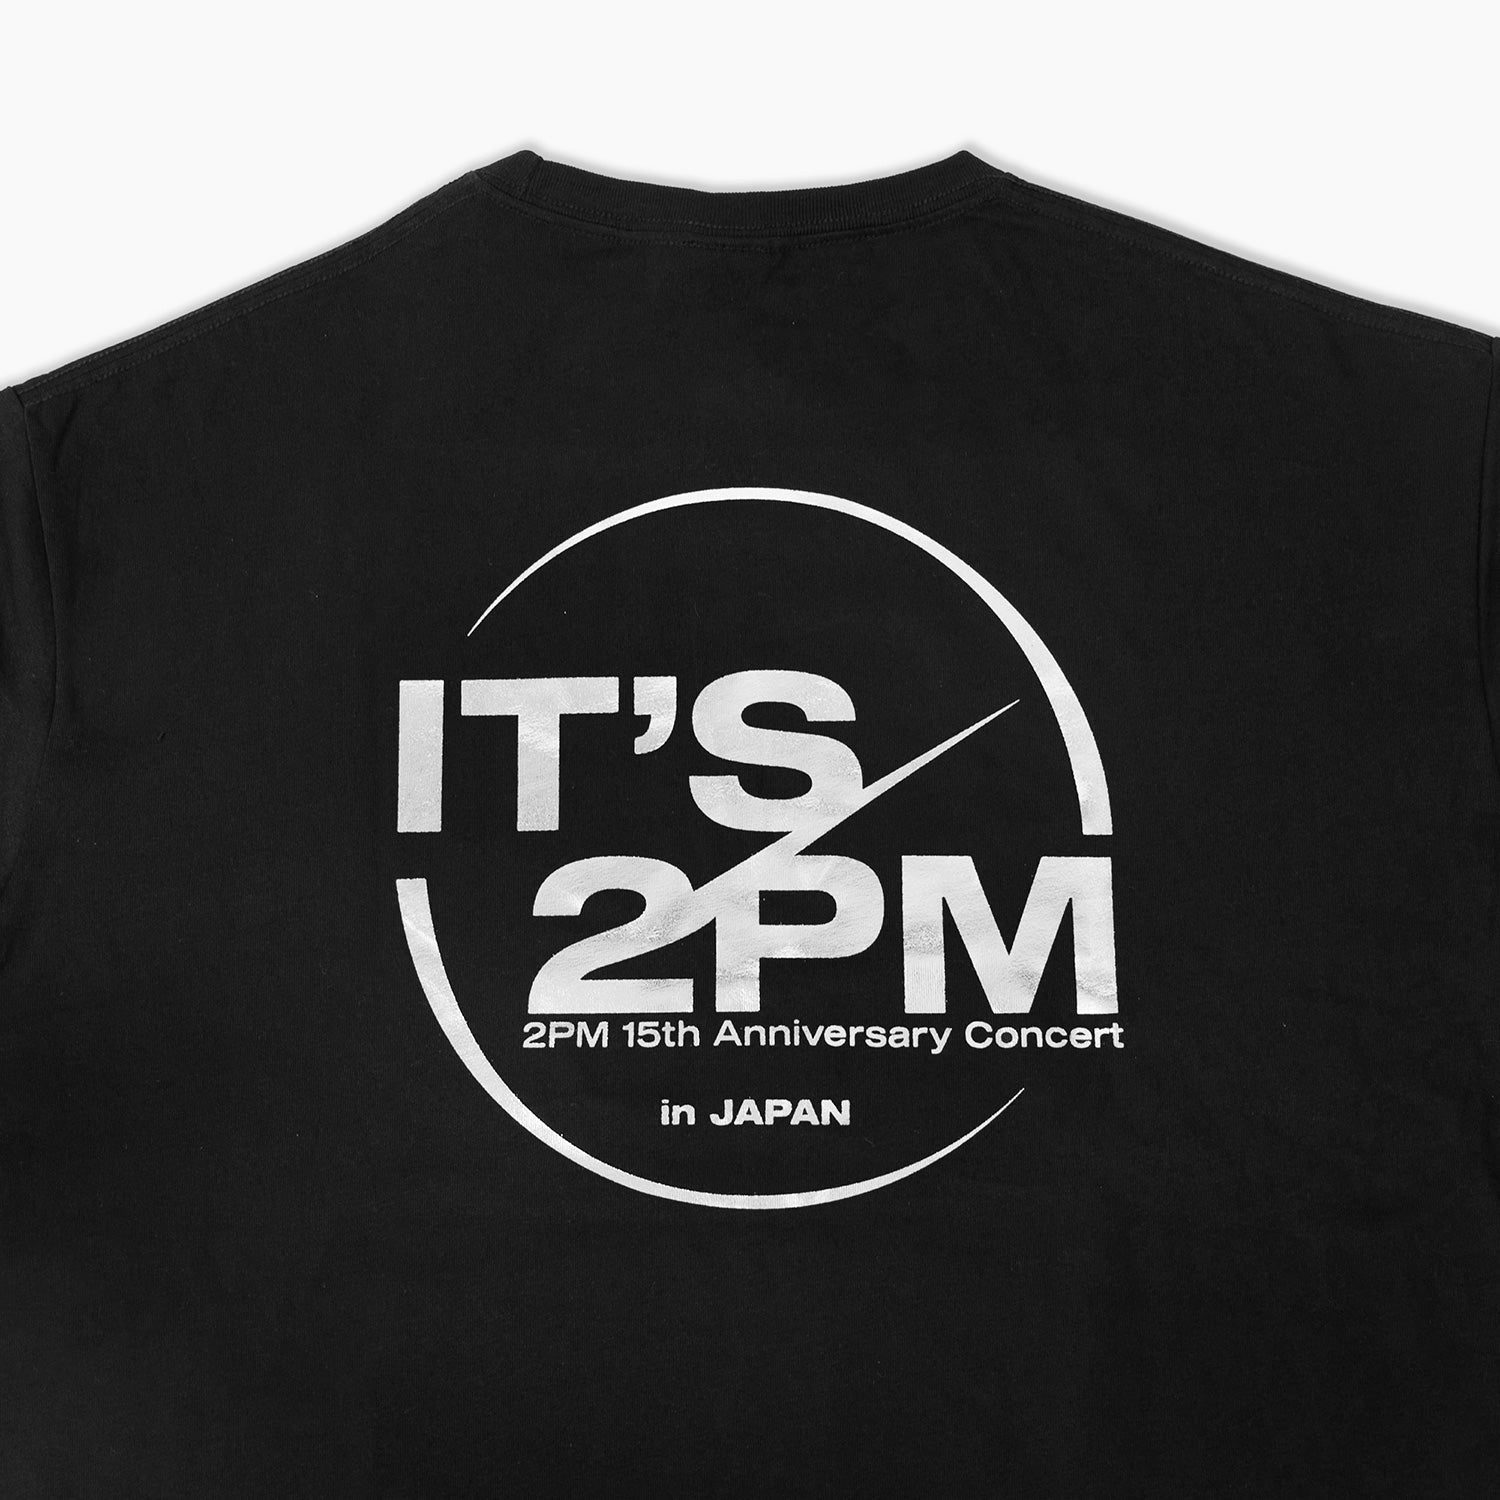 GRAPHIC T-SHIRT is available at 8th July 11:00am (JST) at Human